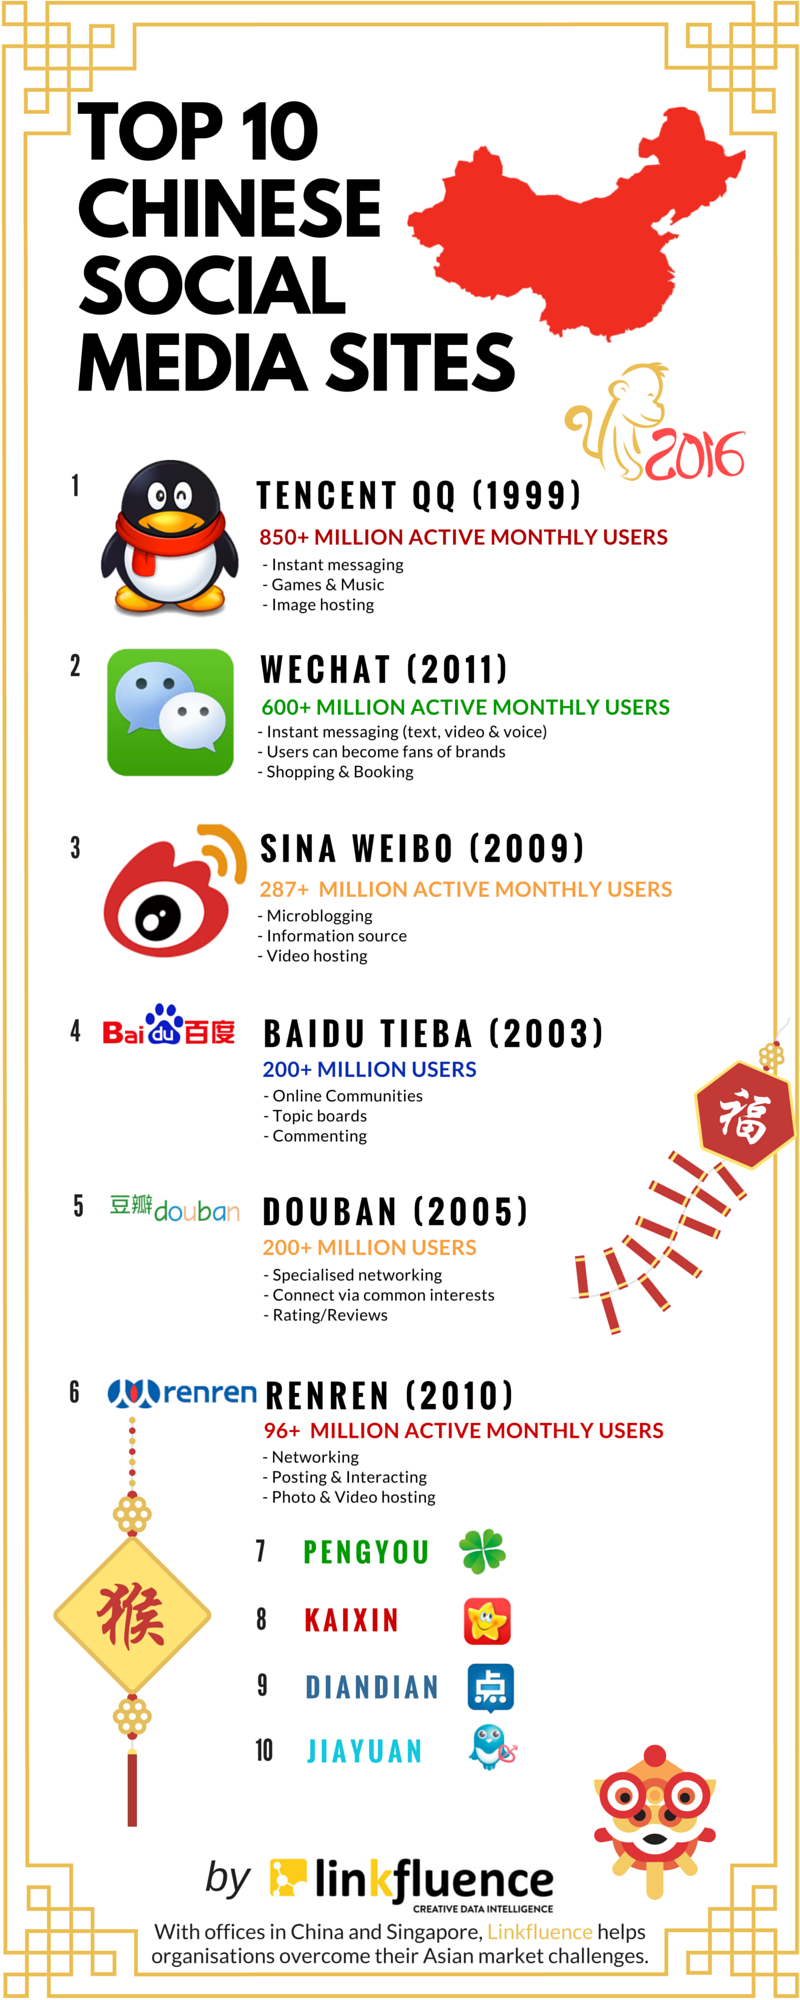 Top 10 Chinese Social Media Sites